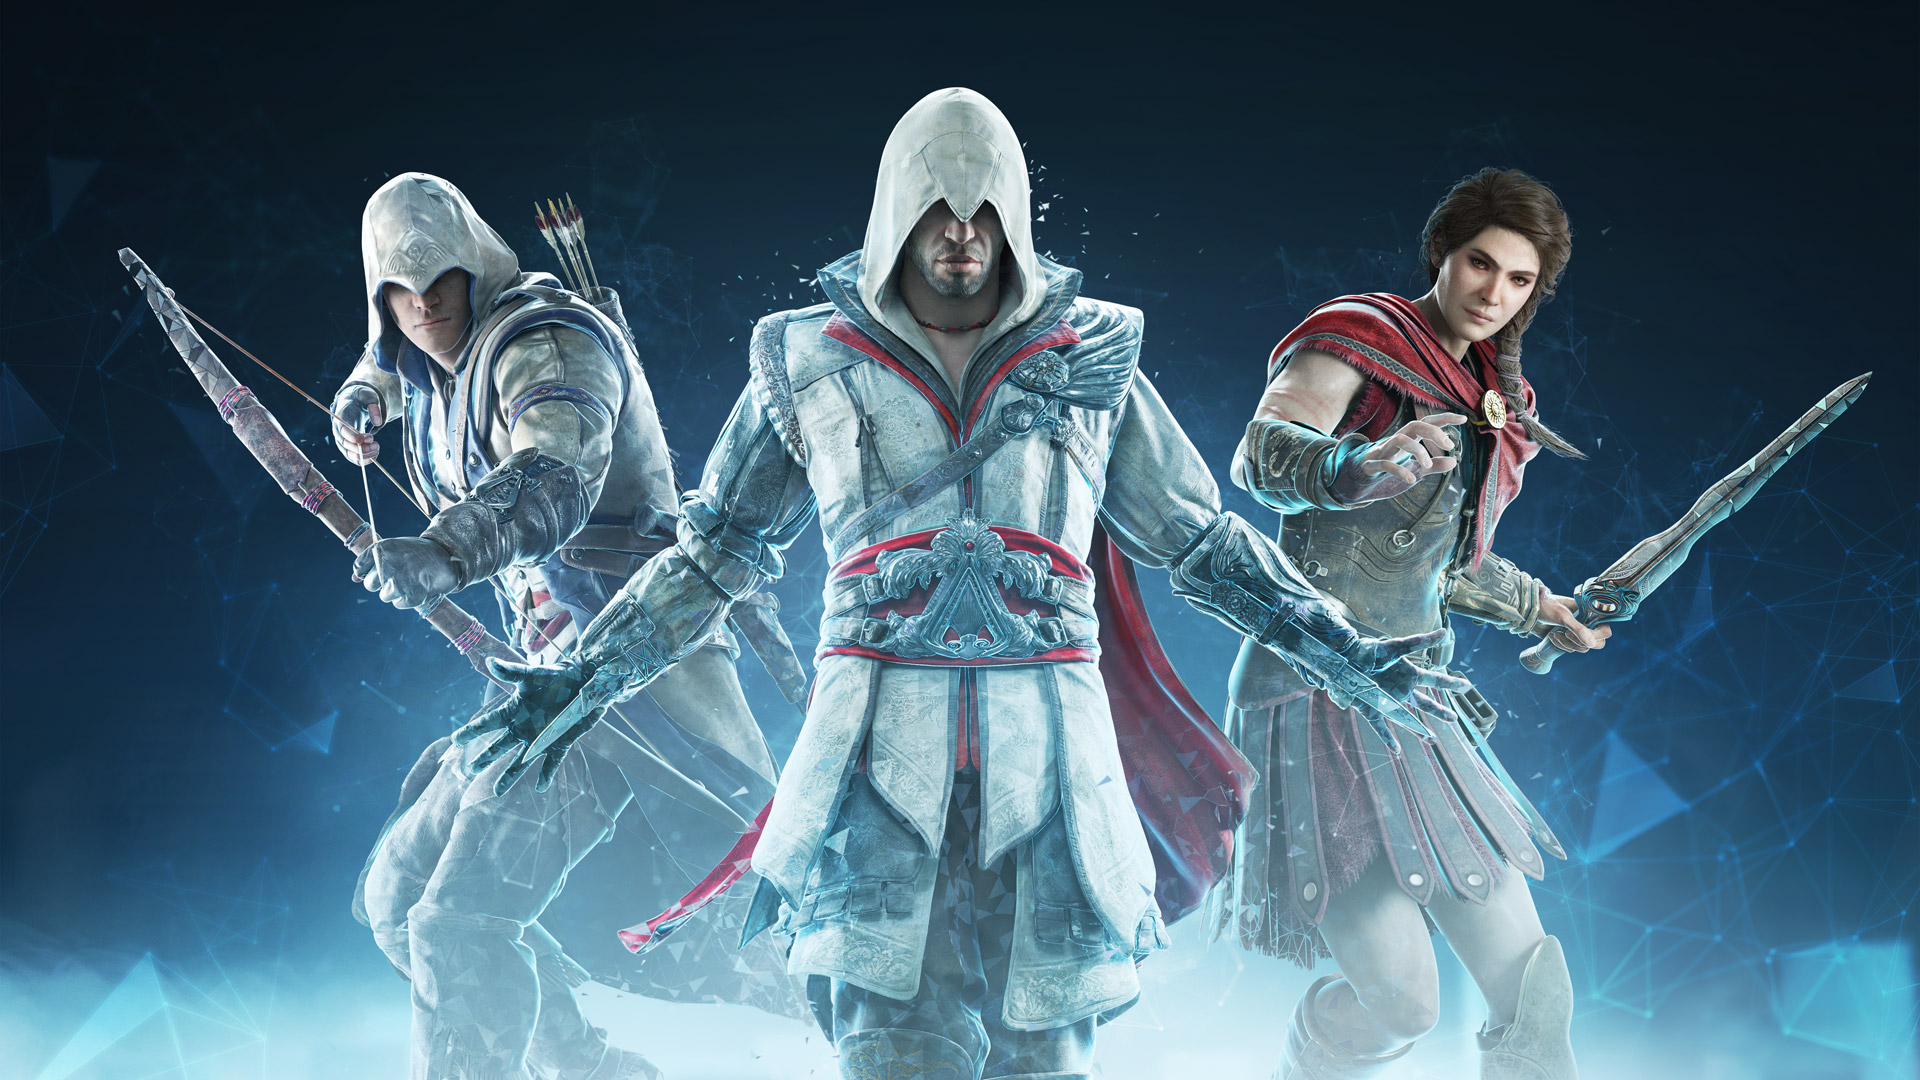 Assassin's Creed: Bloodlines [Análise e Unboxing] 